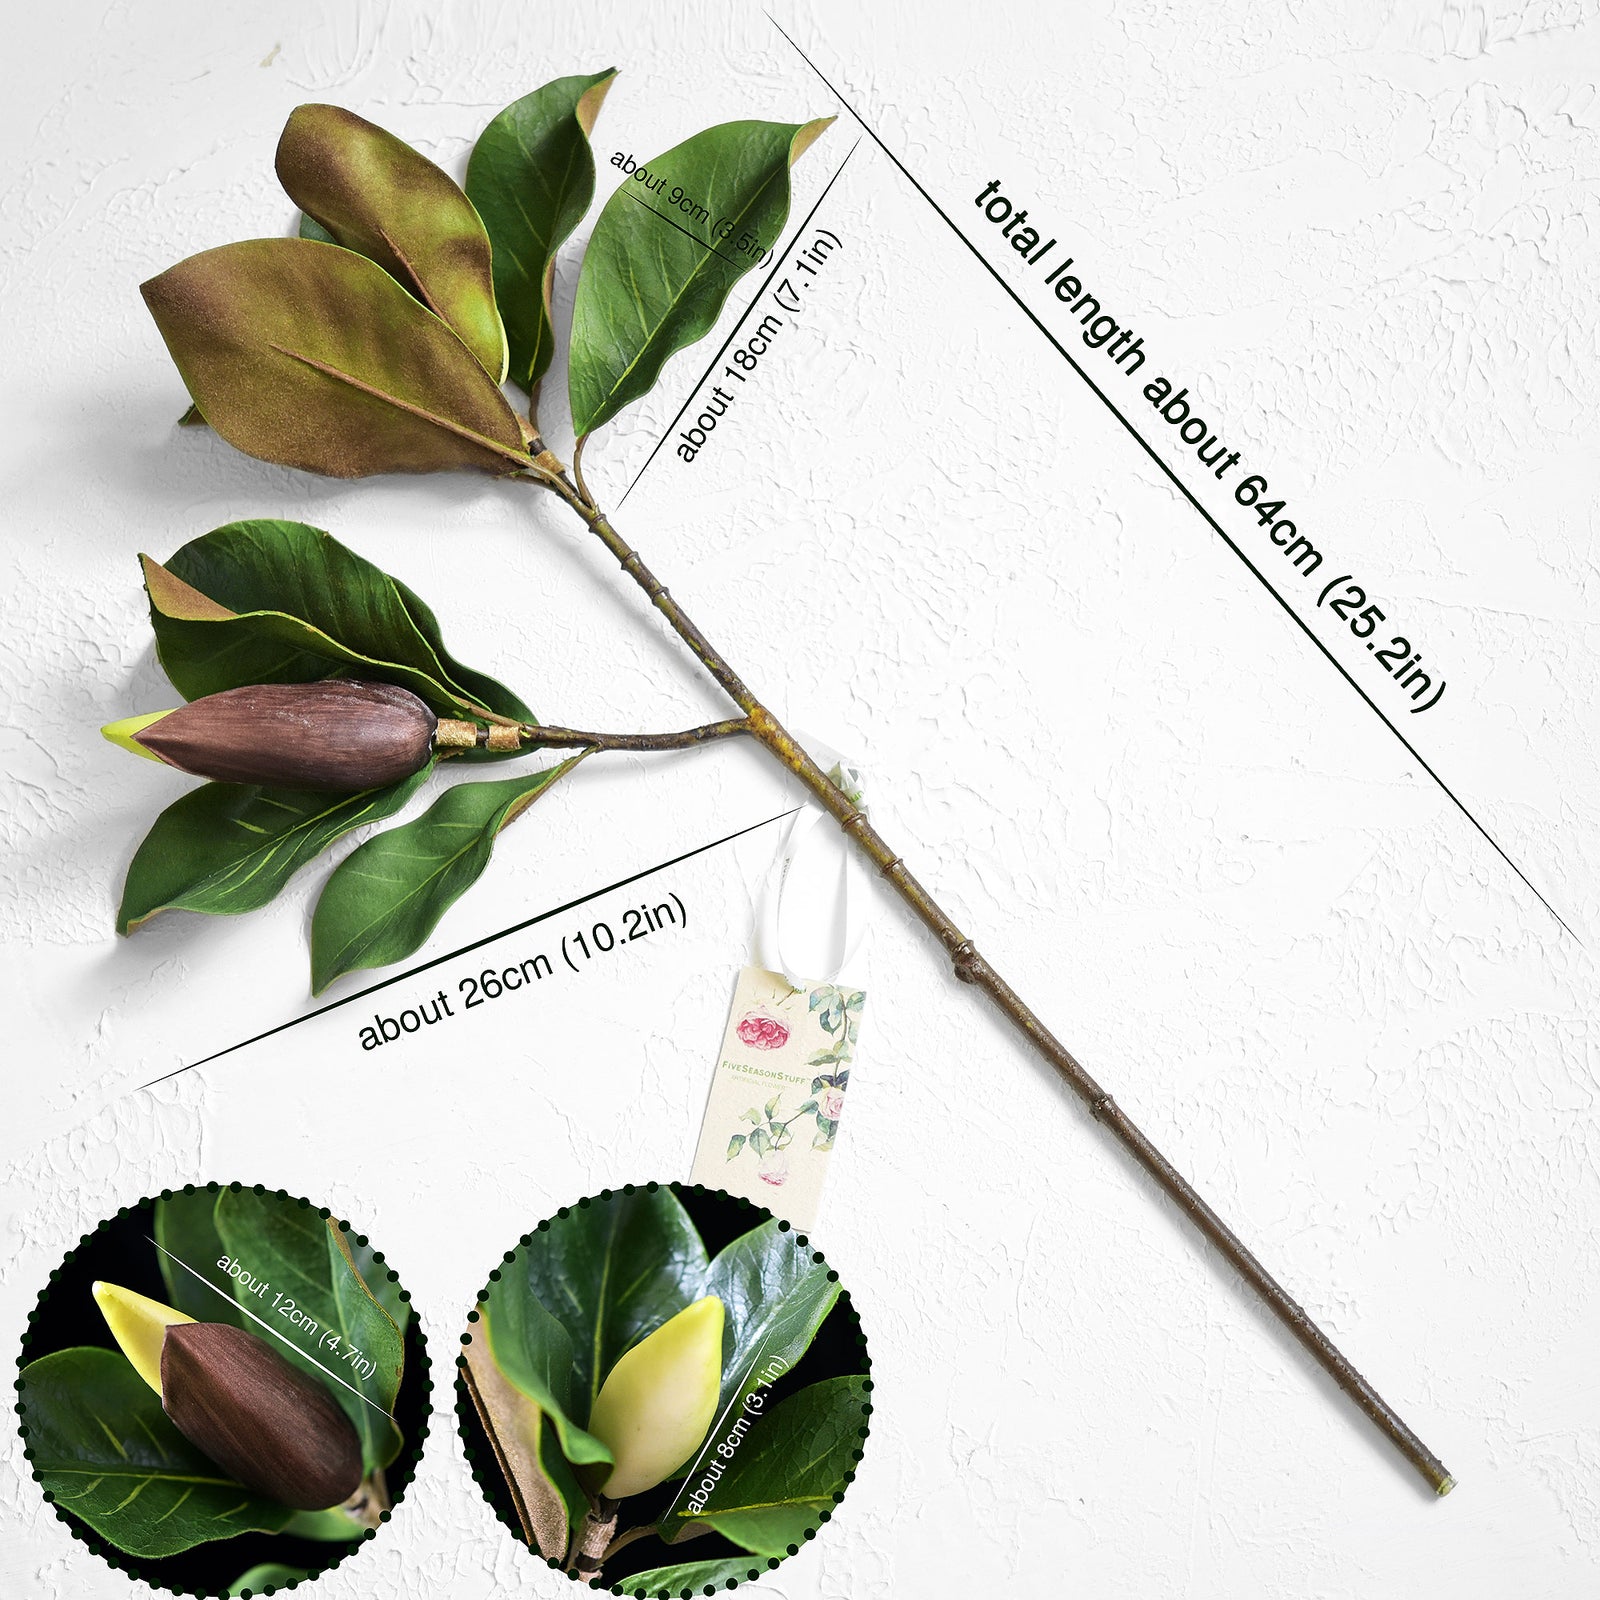 Magnolia Leaf Spray with Buds Artificial Greenery 25 inches